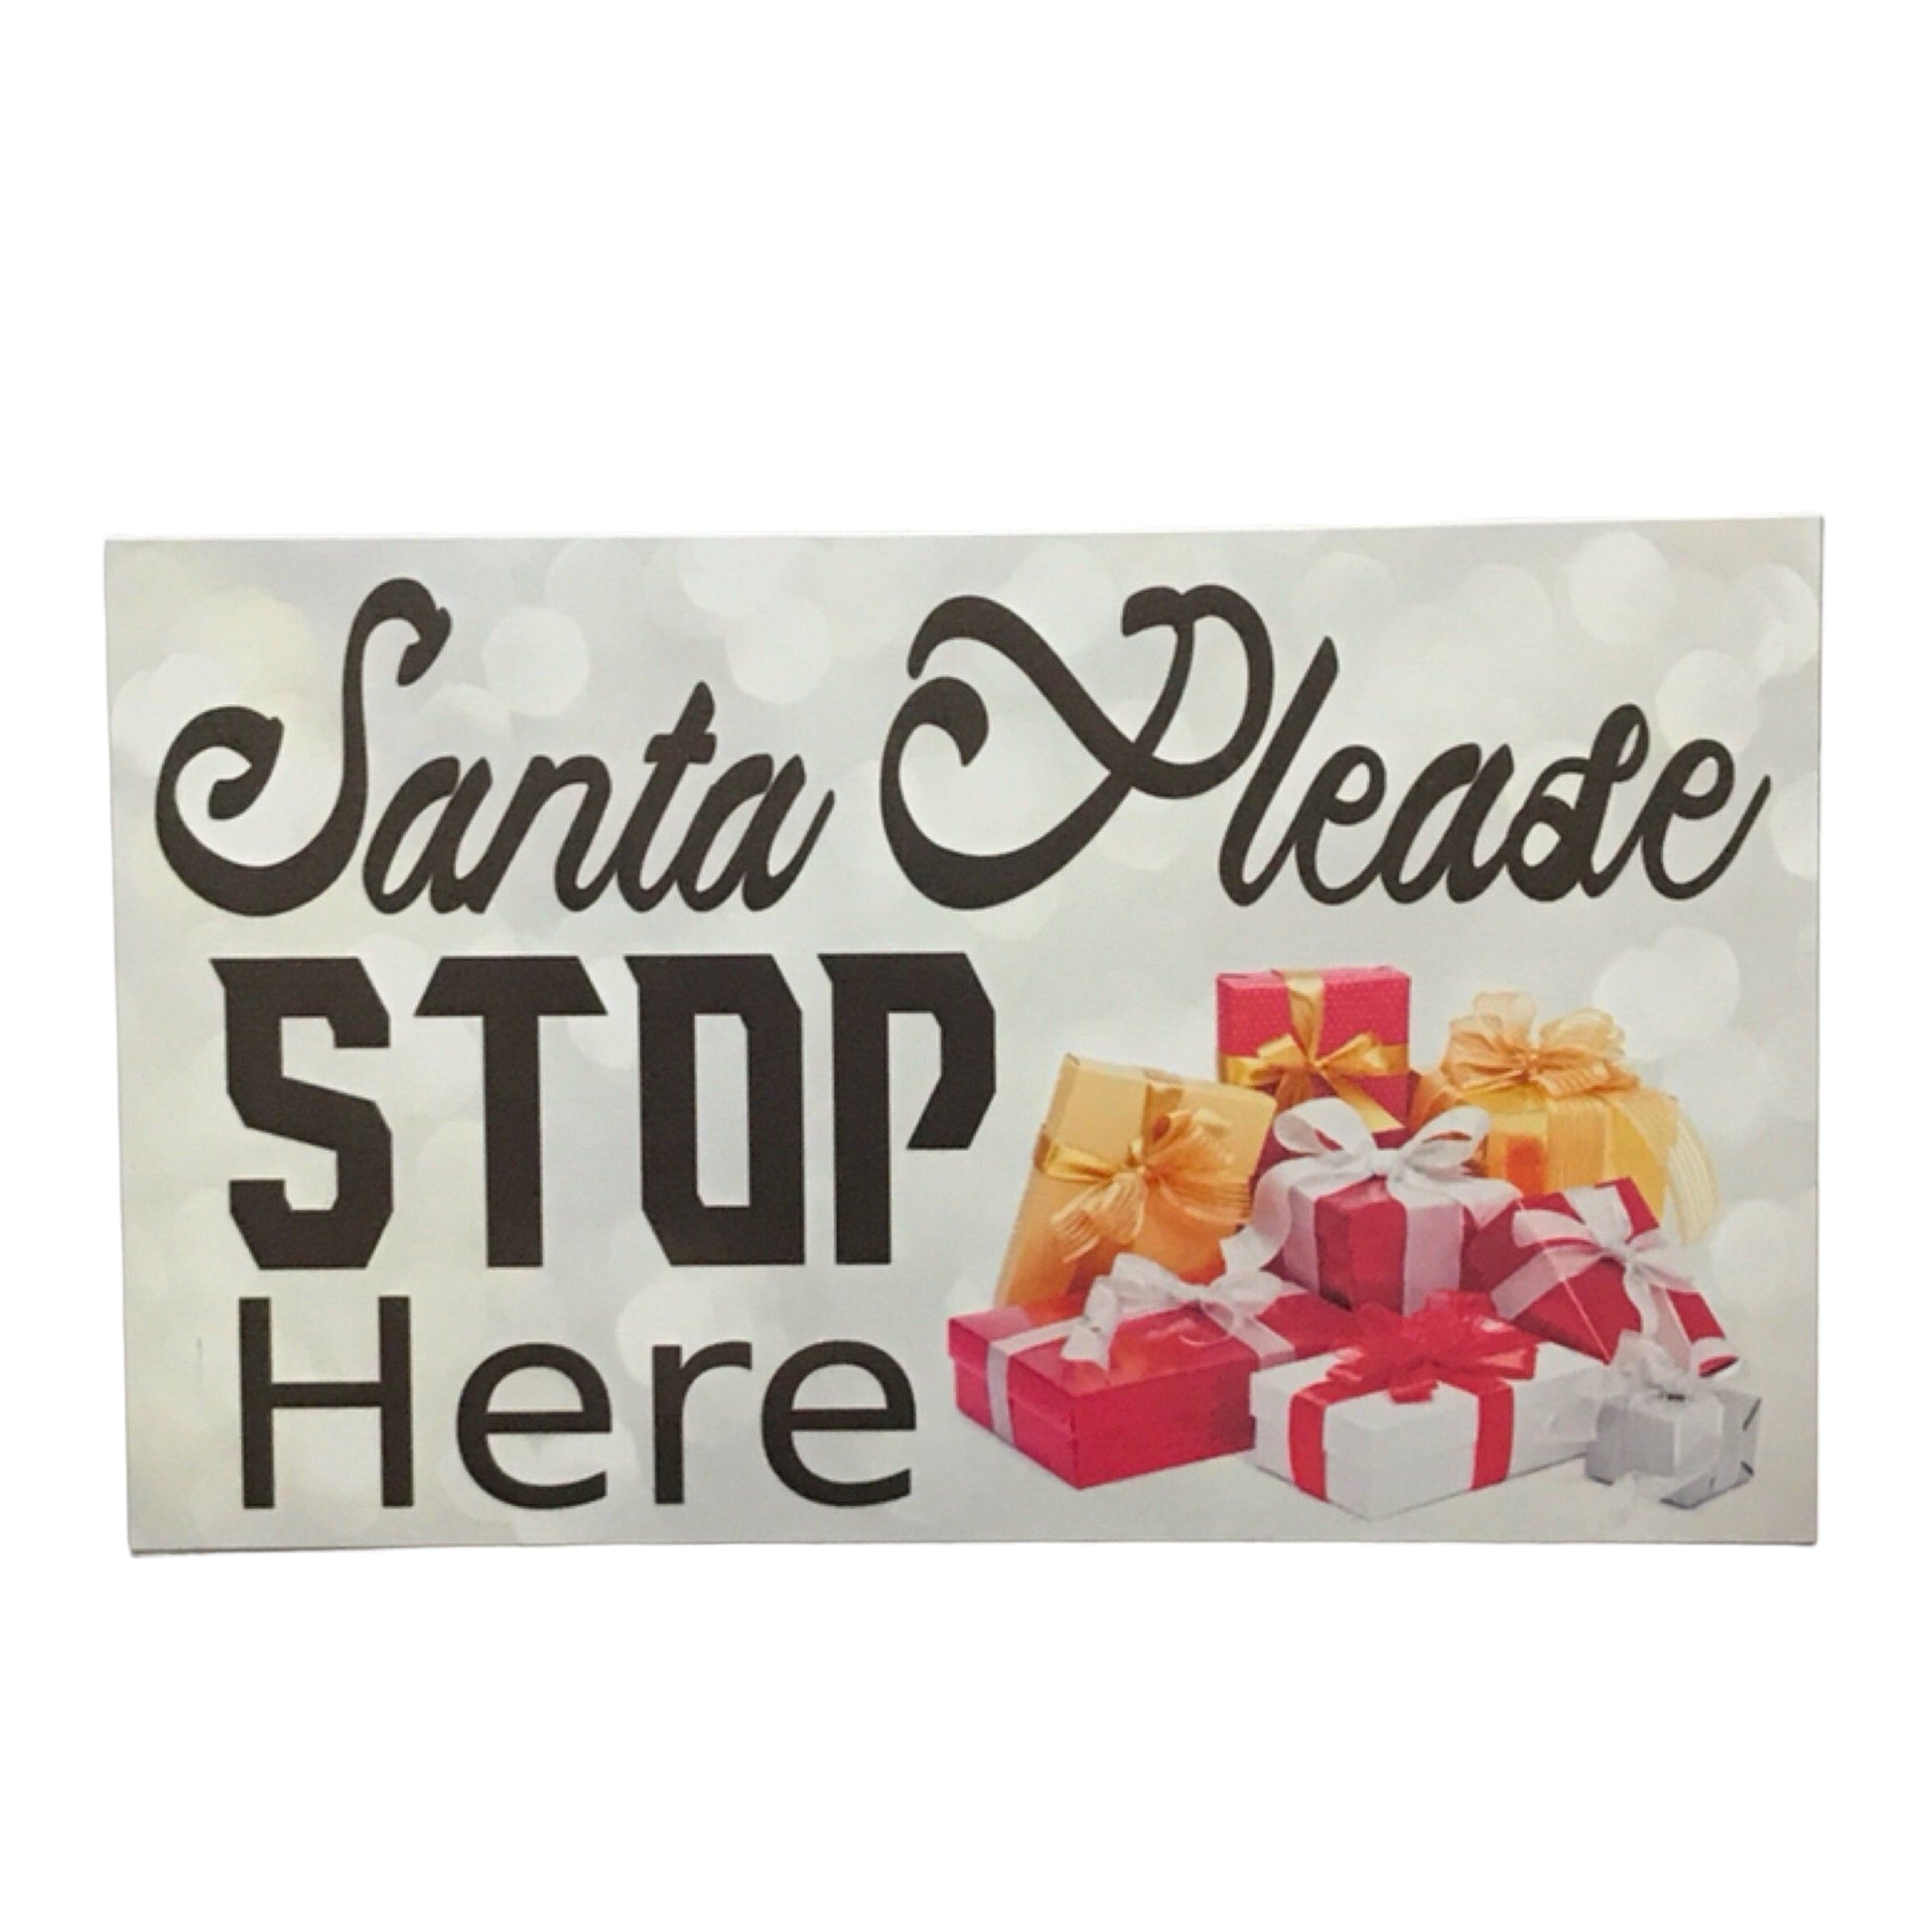 Santa Stop Here Please Christmas Sign - The Renmy Store Homewares & Gifts 